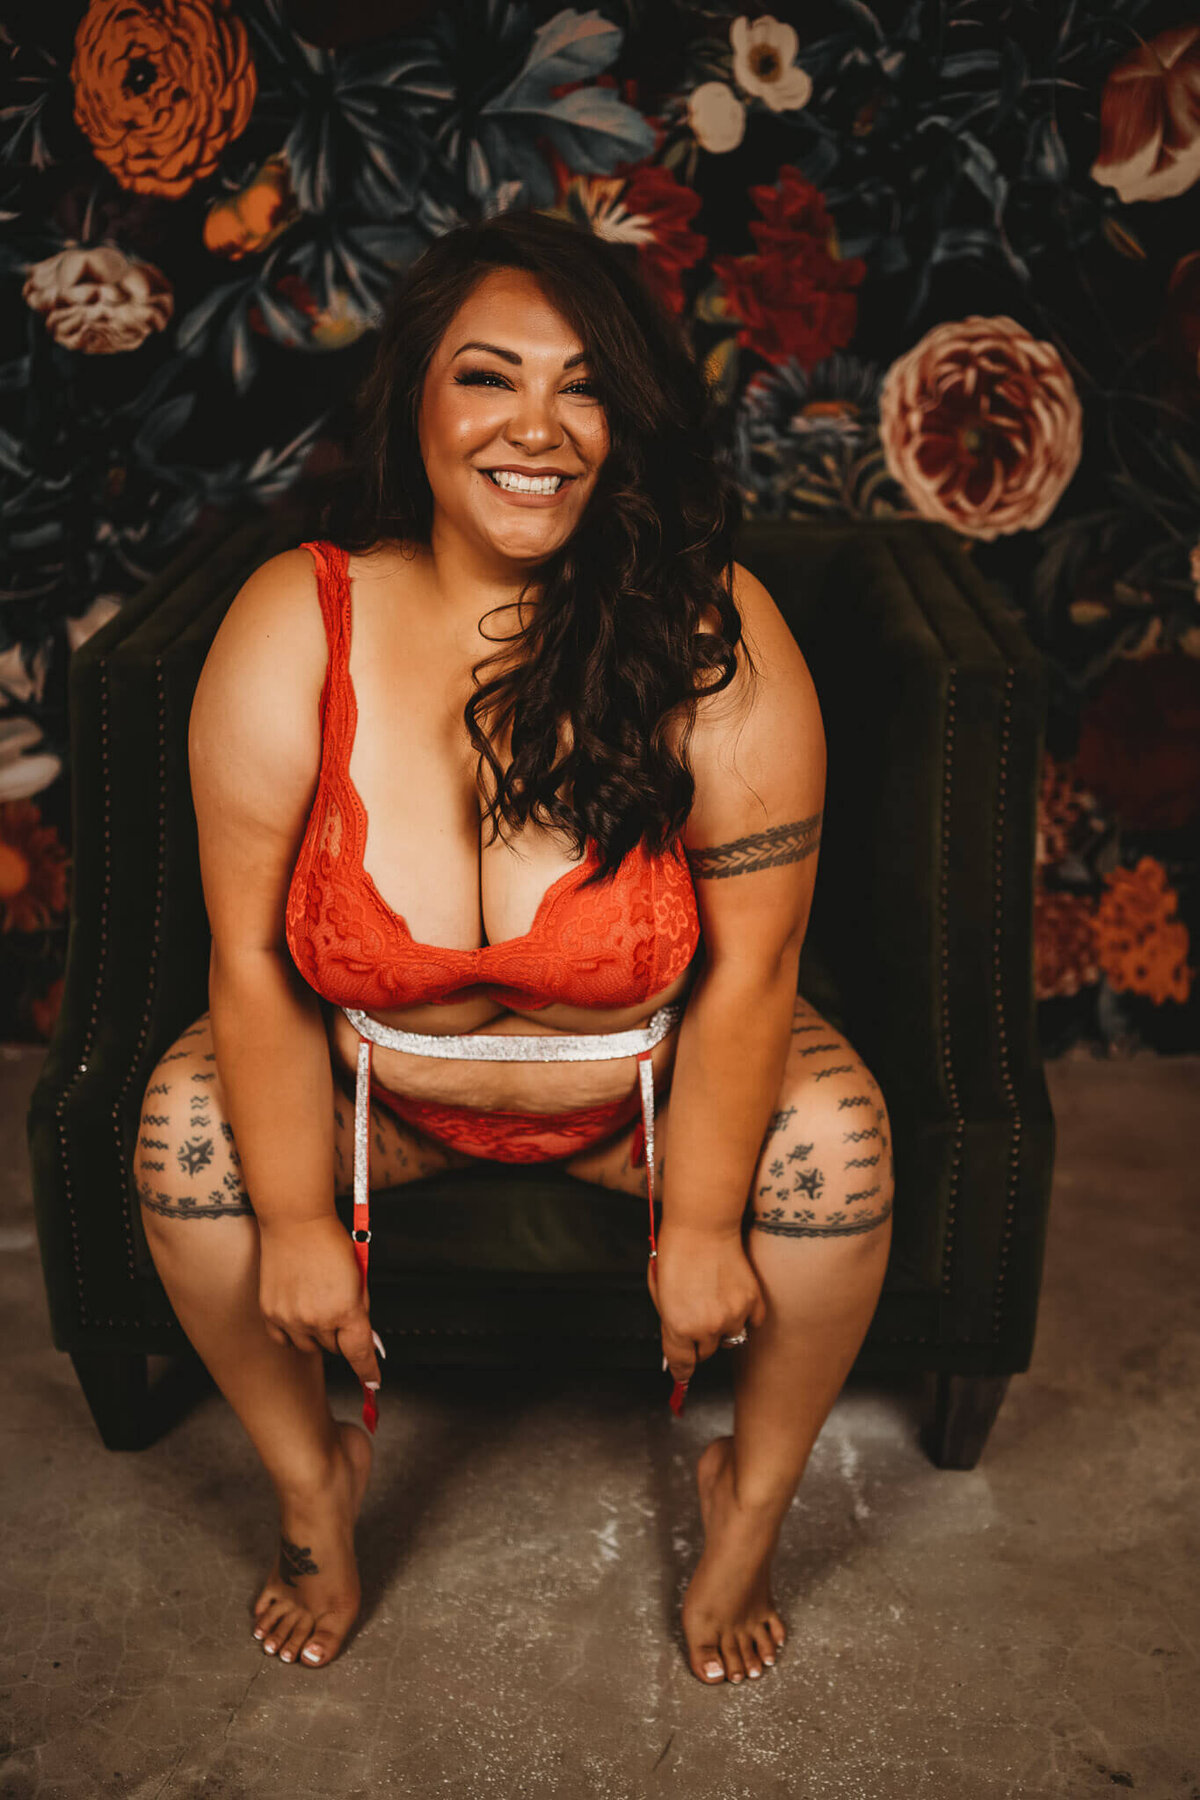 beautiful plus sized and tattooed woman wearing red lingerie, smiling at camera